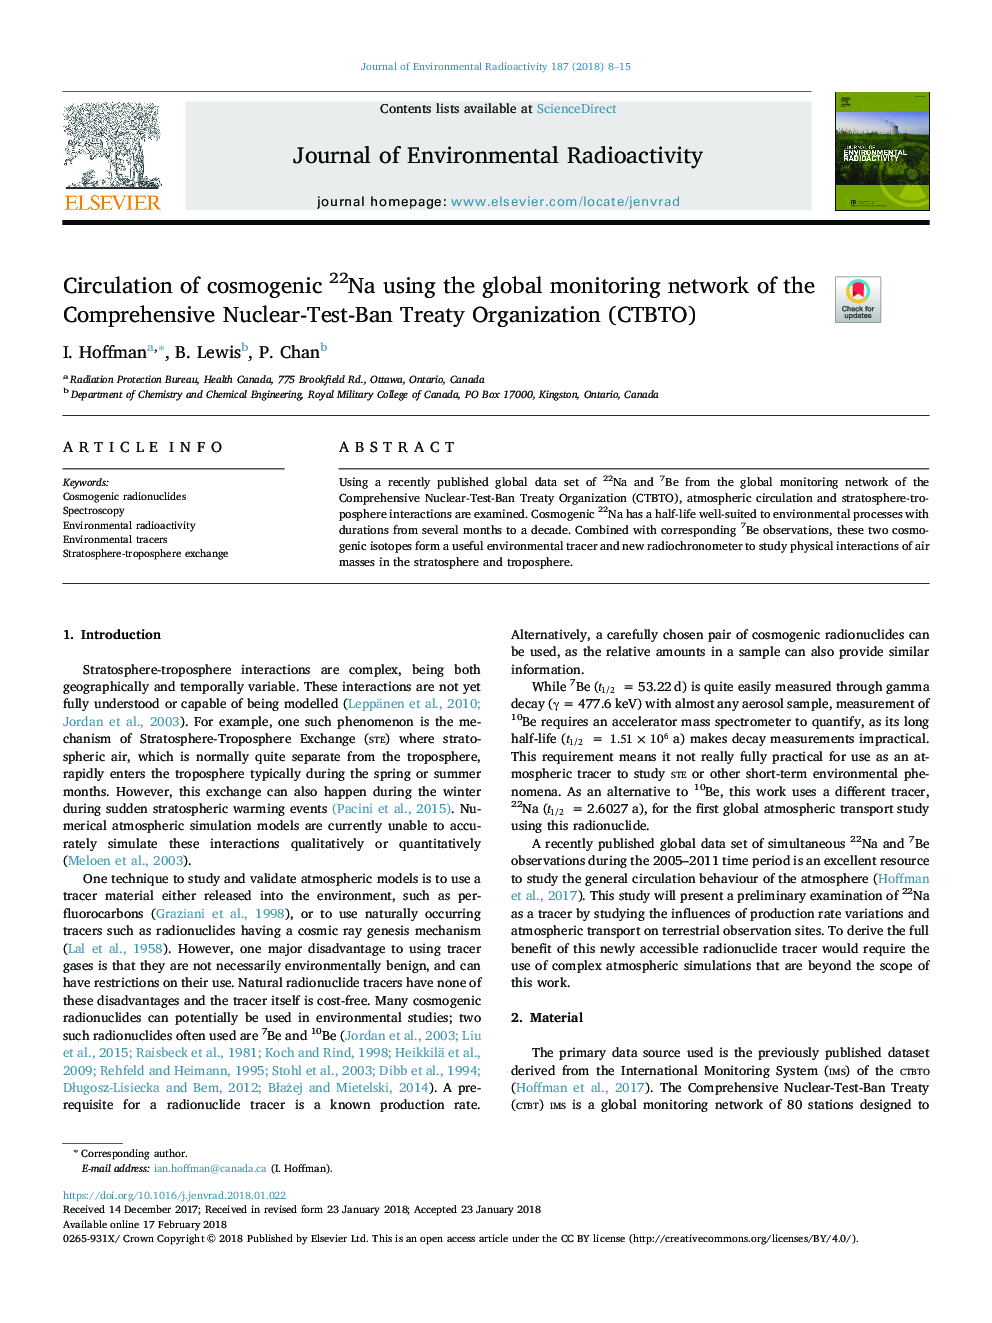 Circulation of cosmogenic 22Na using the global monitoring network of the Comprehensive Nuclear-Test-Ban Treaty Organization (CTBTO)